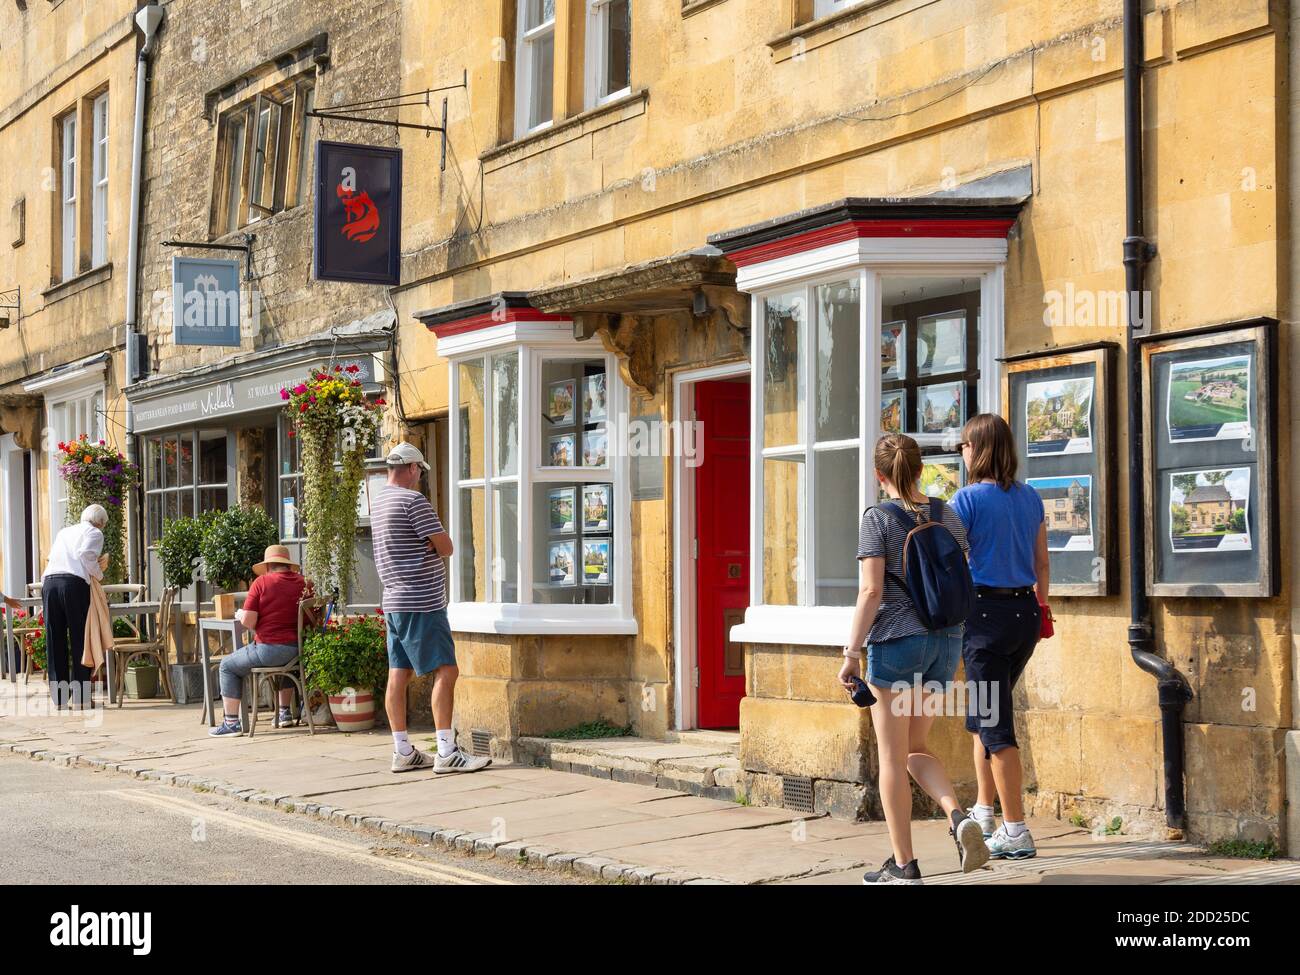 Michael's Restaurant and estate agent, High Street, Chipping Campden, Gloucestershire, England, United Kingdom Stock Photo